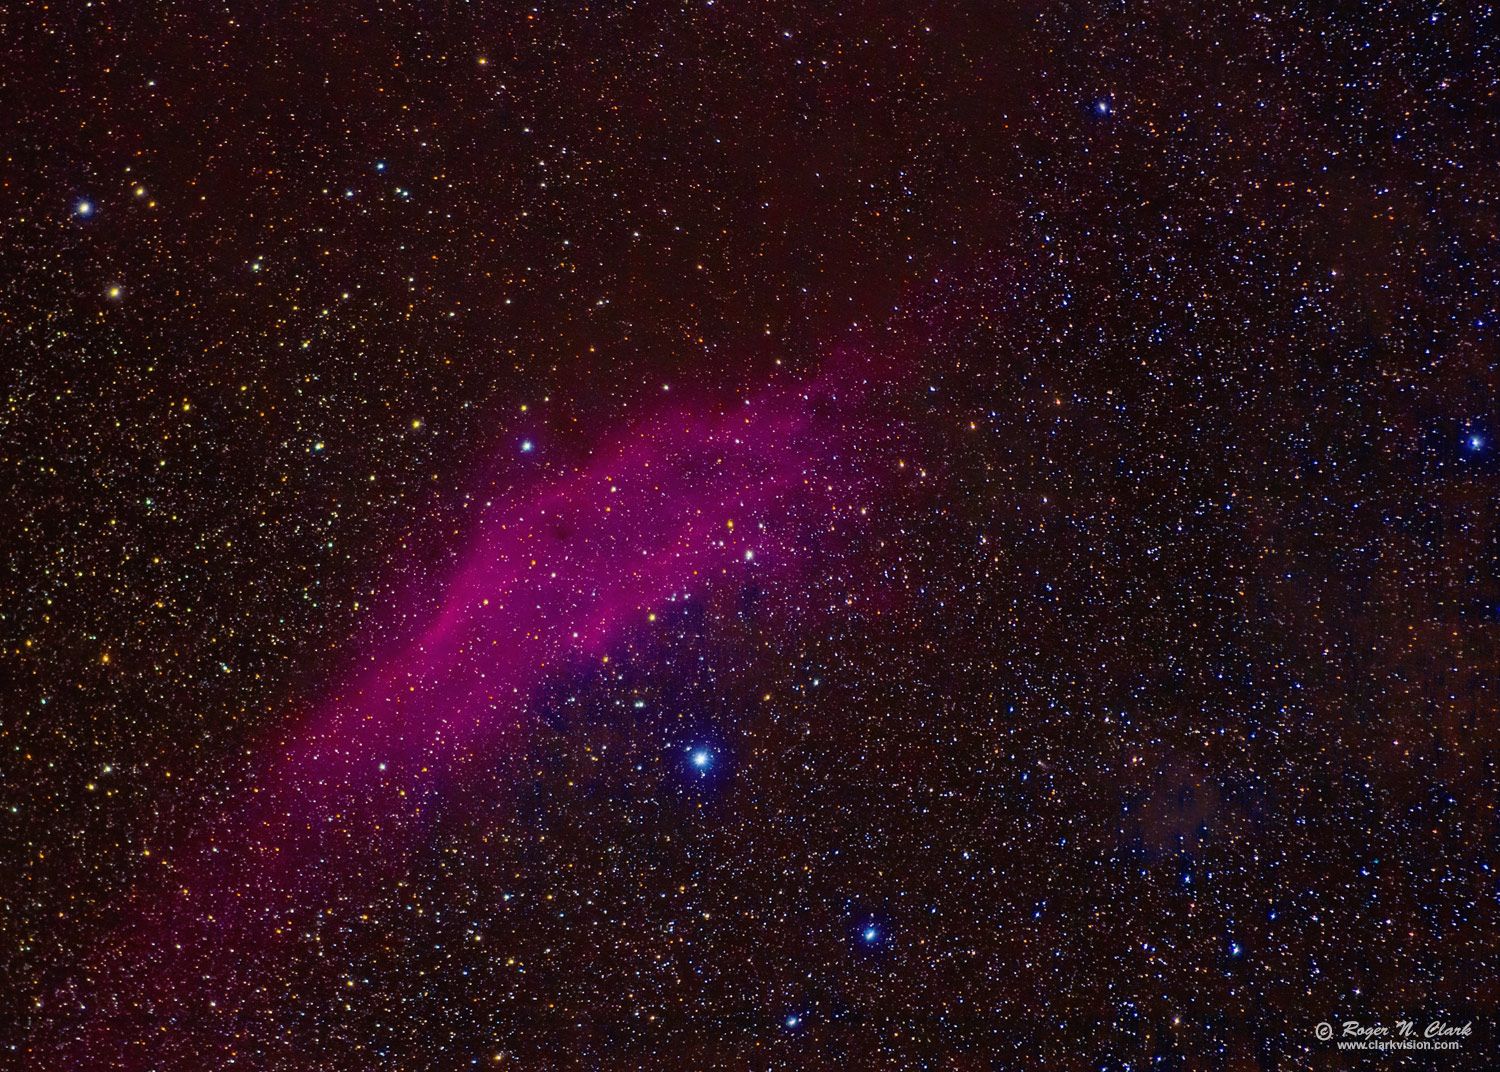 image california_nebula_200mm.c12.29.2016.IMG_2982-3020-rs.g-c1-1500s.jpg is Copyrighted by Roger N. Clark, www.clarkvision.com